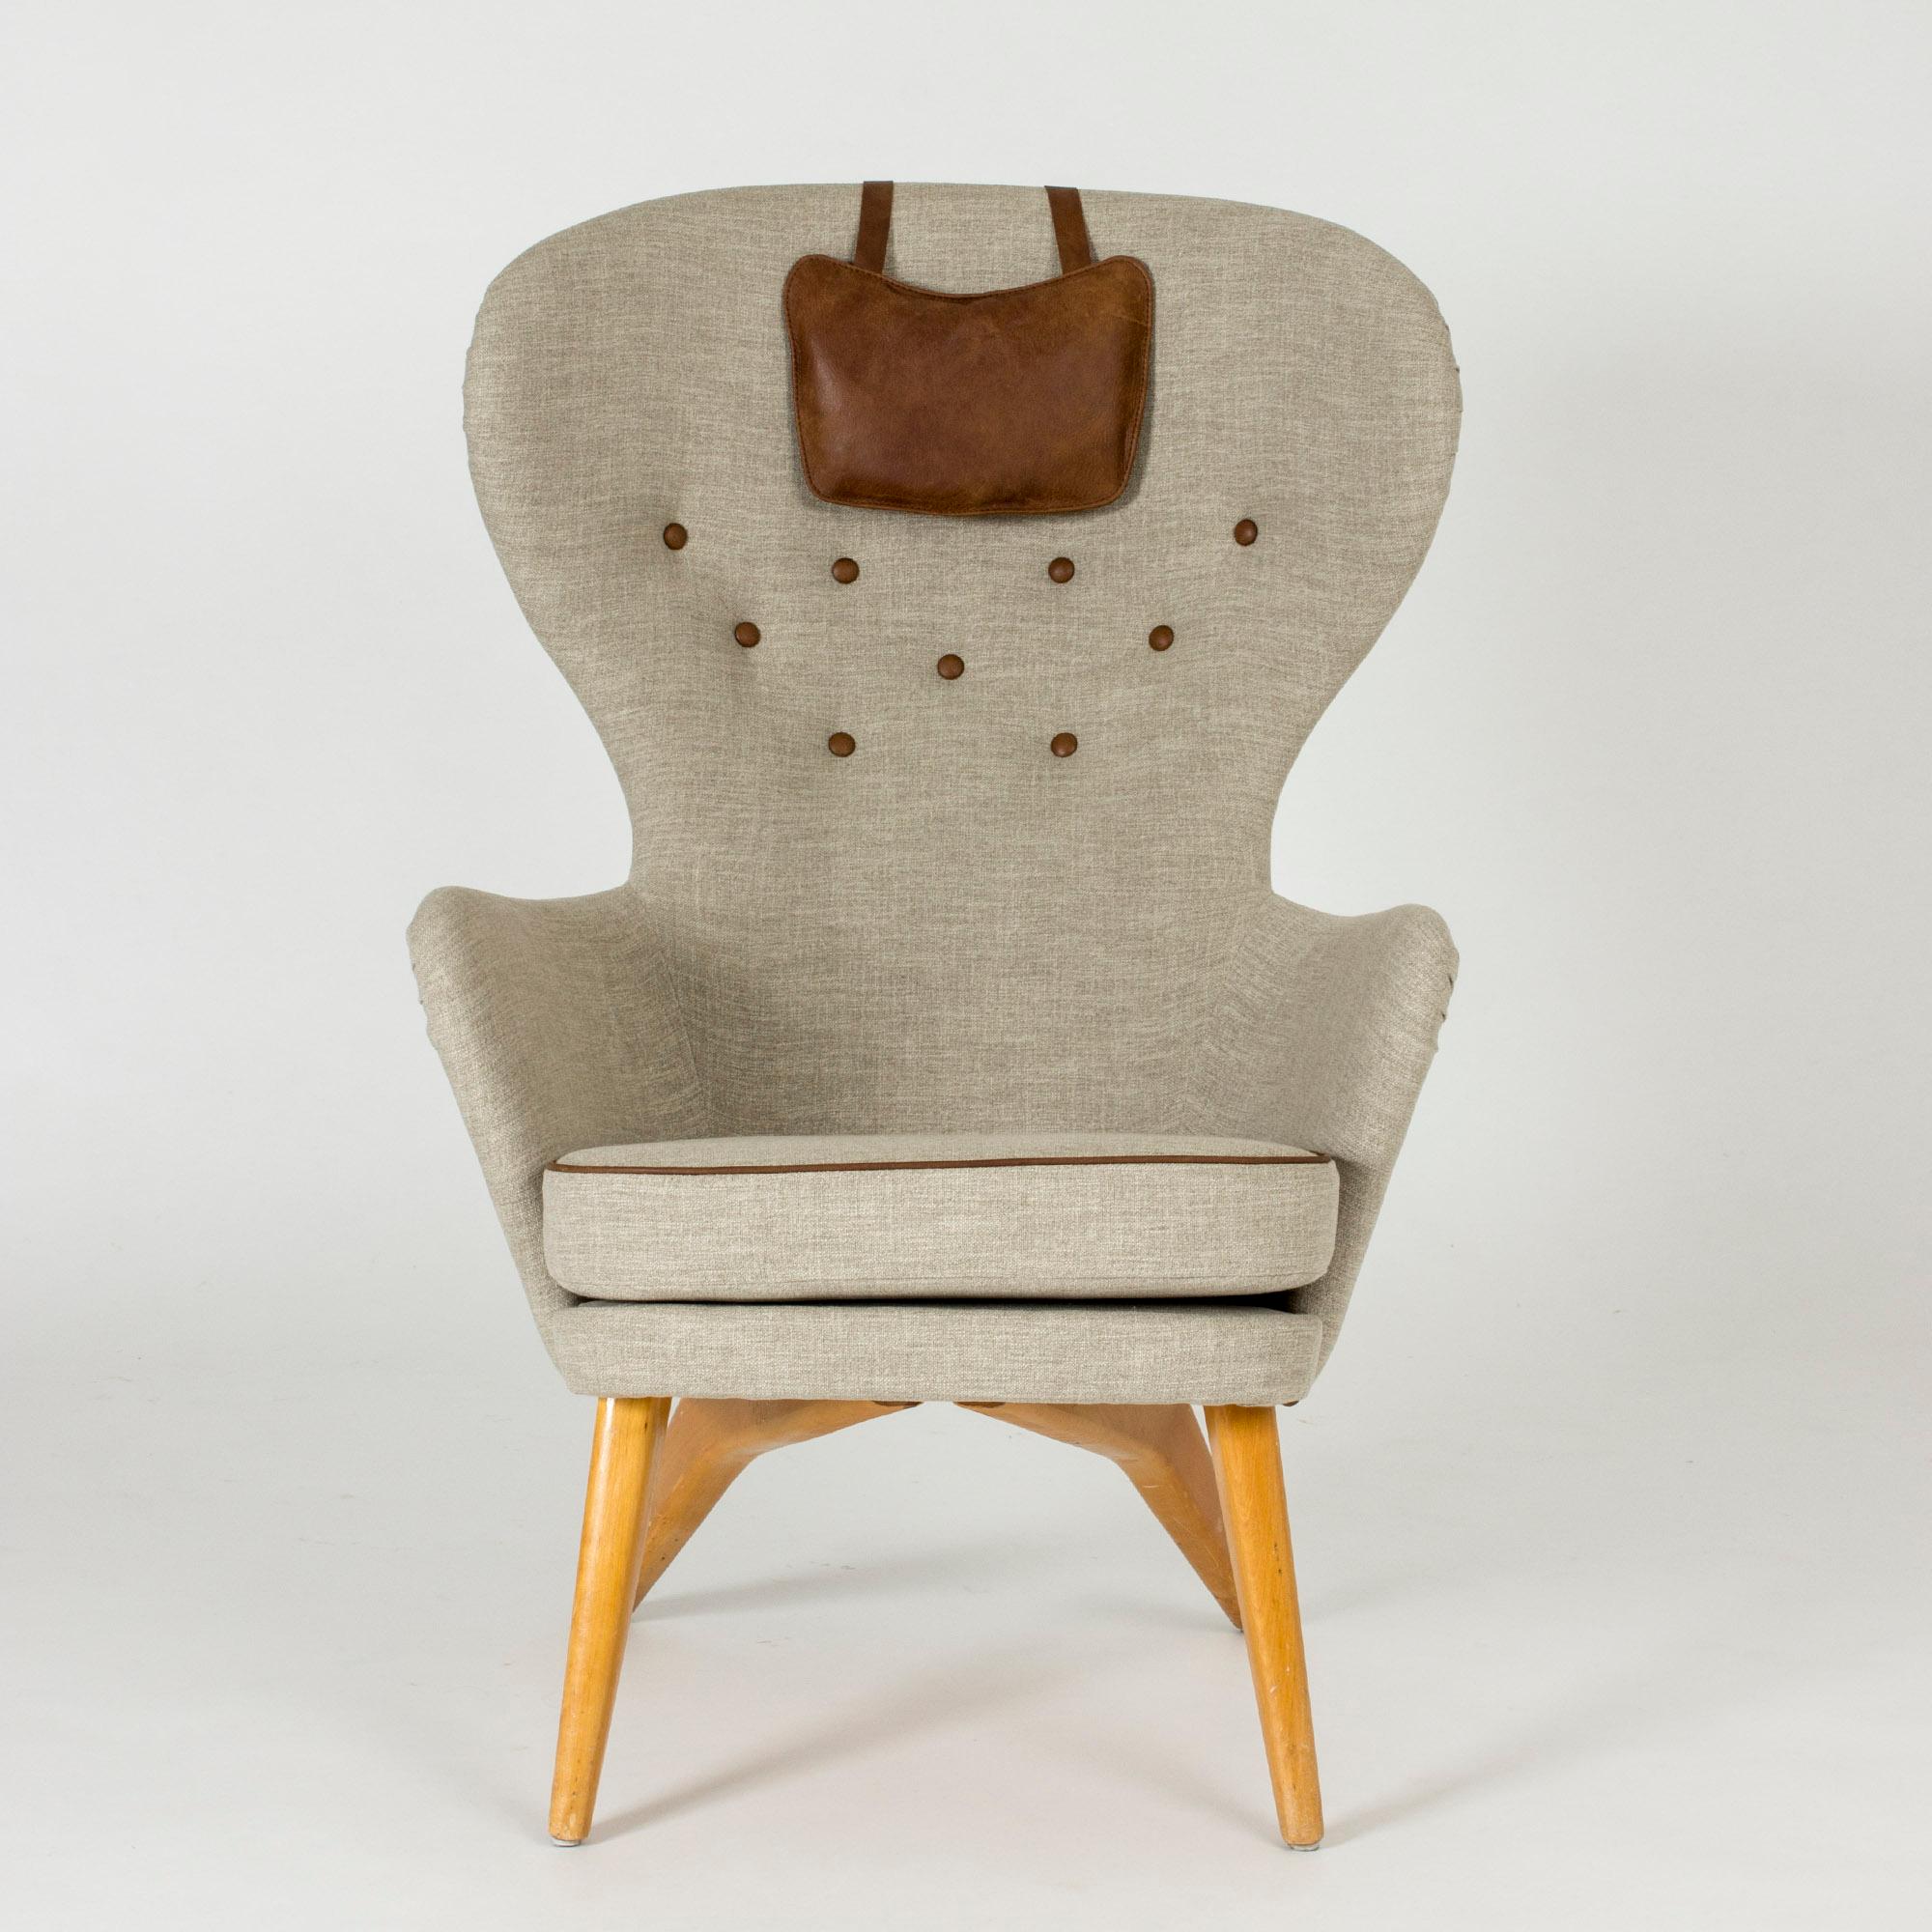 Cool lounge chair by Gustaf Hiort af Ornäs, with a tall, wide back and amazing silhouette. Brown leather piping, buttons and small neck cushion.